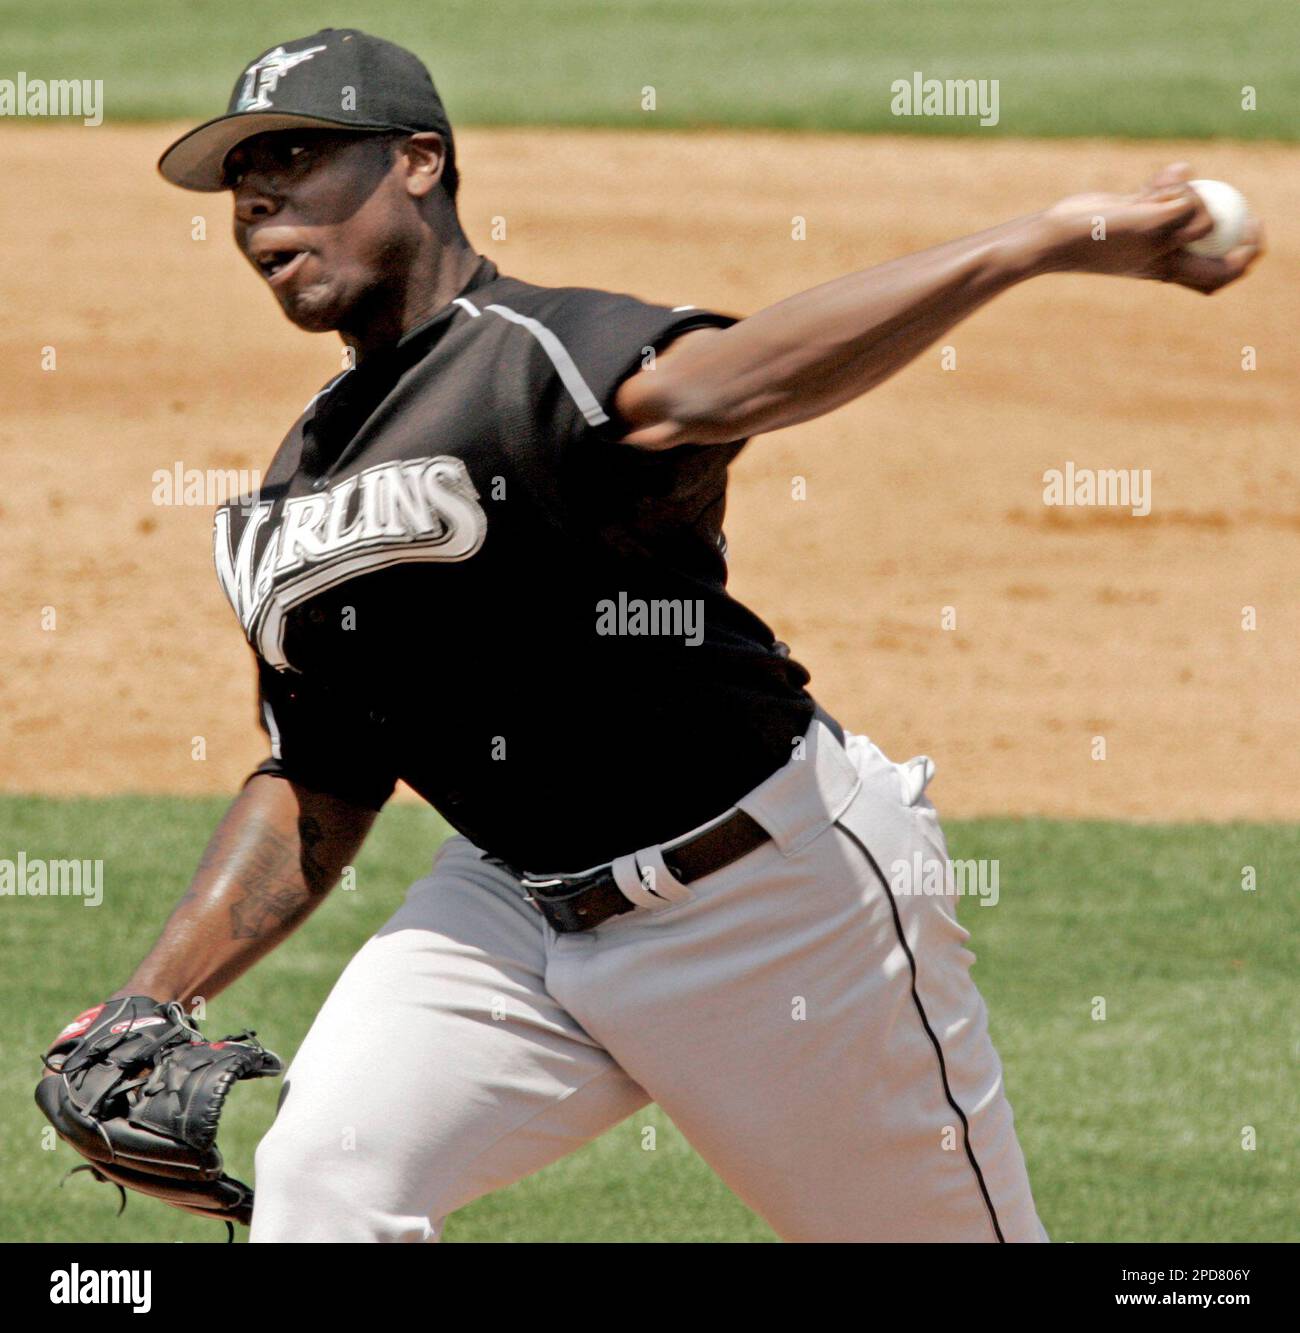 Florida Marlins starter Dontrelle Willis pitches against the St. Louis  Cardinals in a spring training baseball game in Jupiter, Fla., Wednesday,  March 29, 2006. The Marlins are starting over and while they